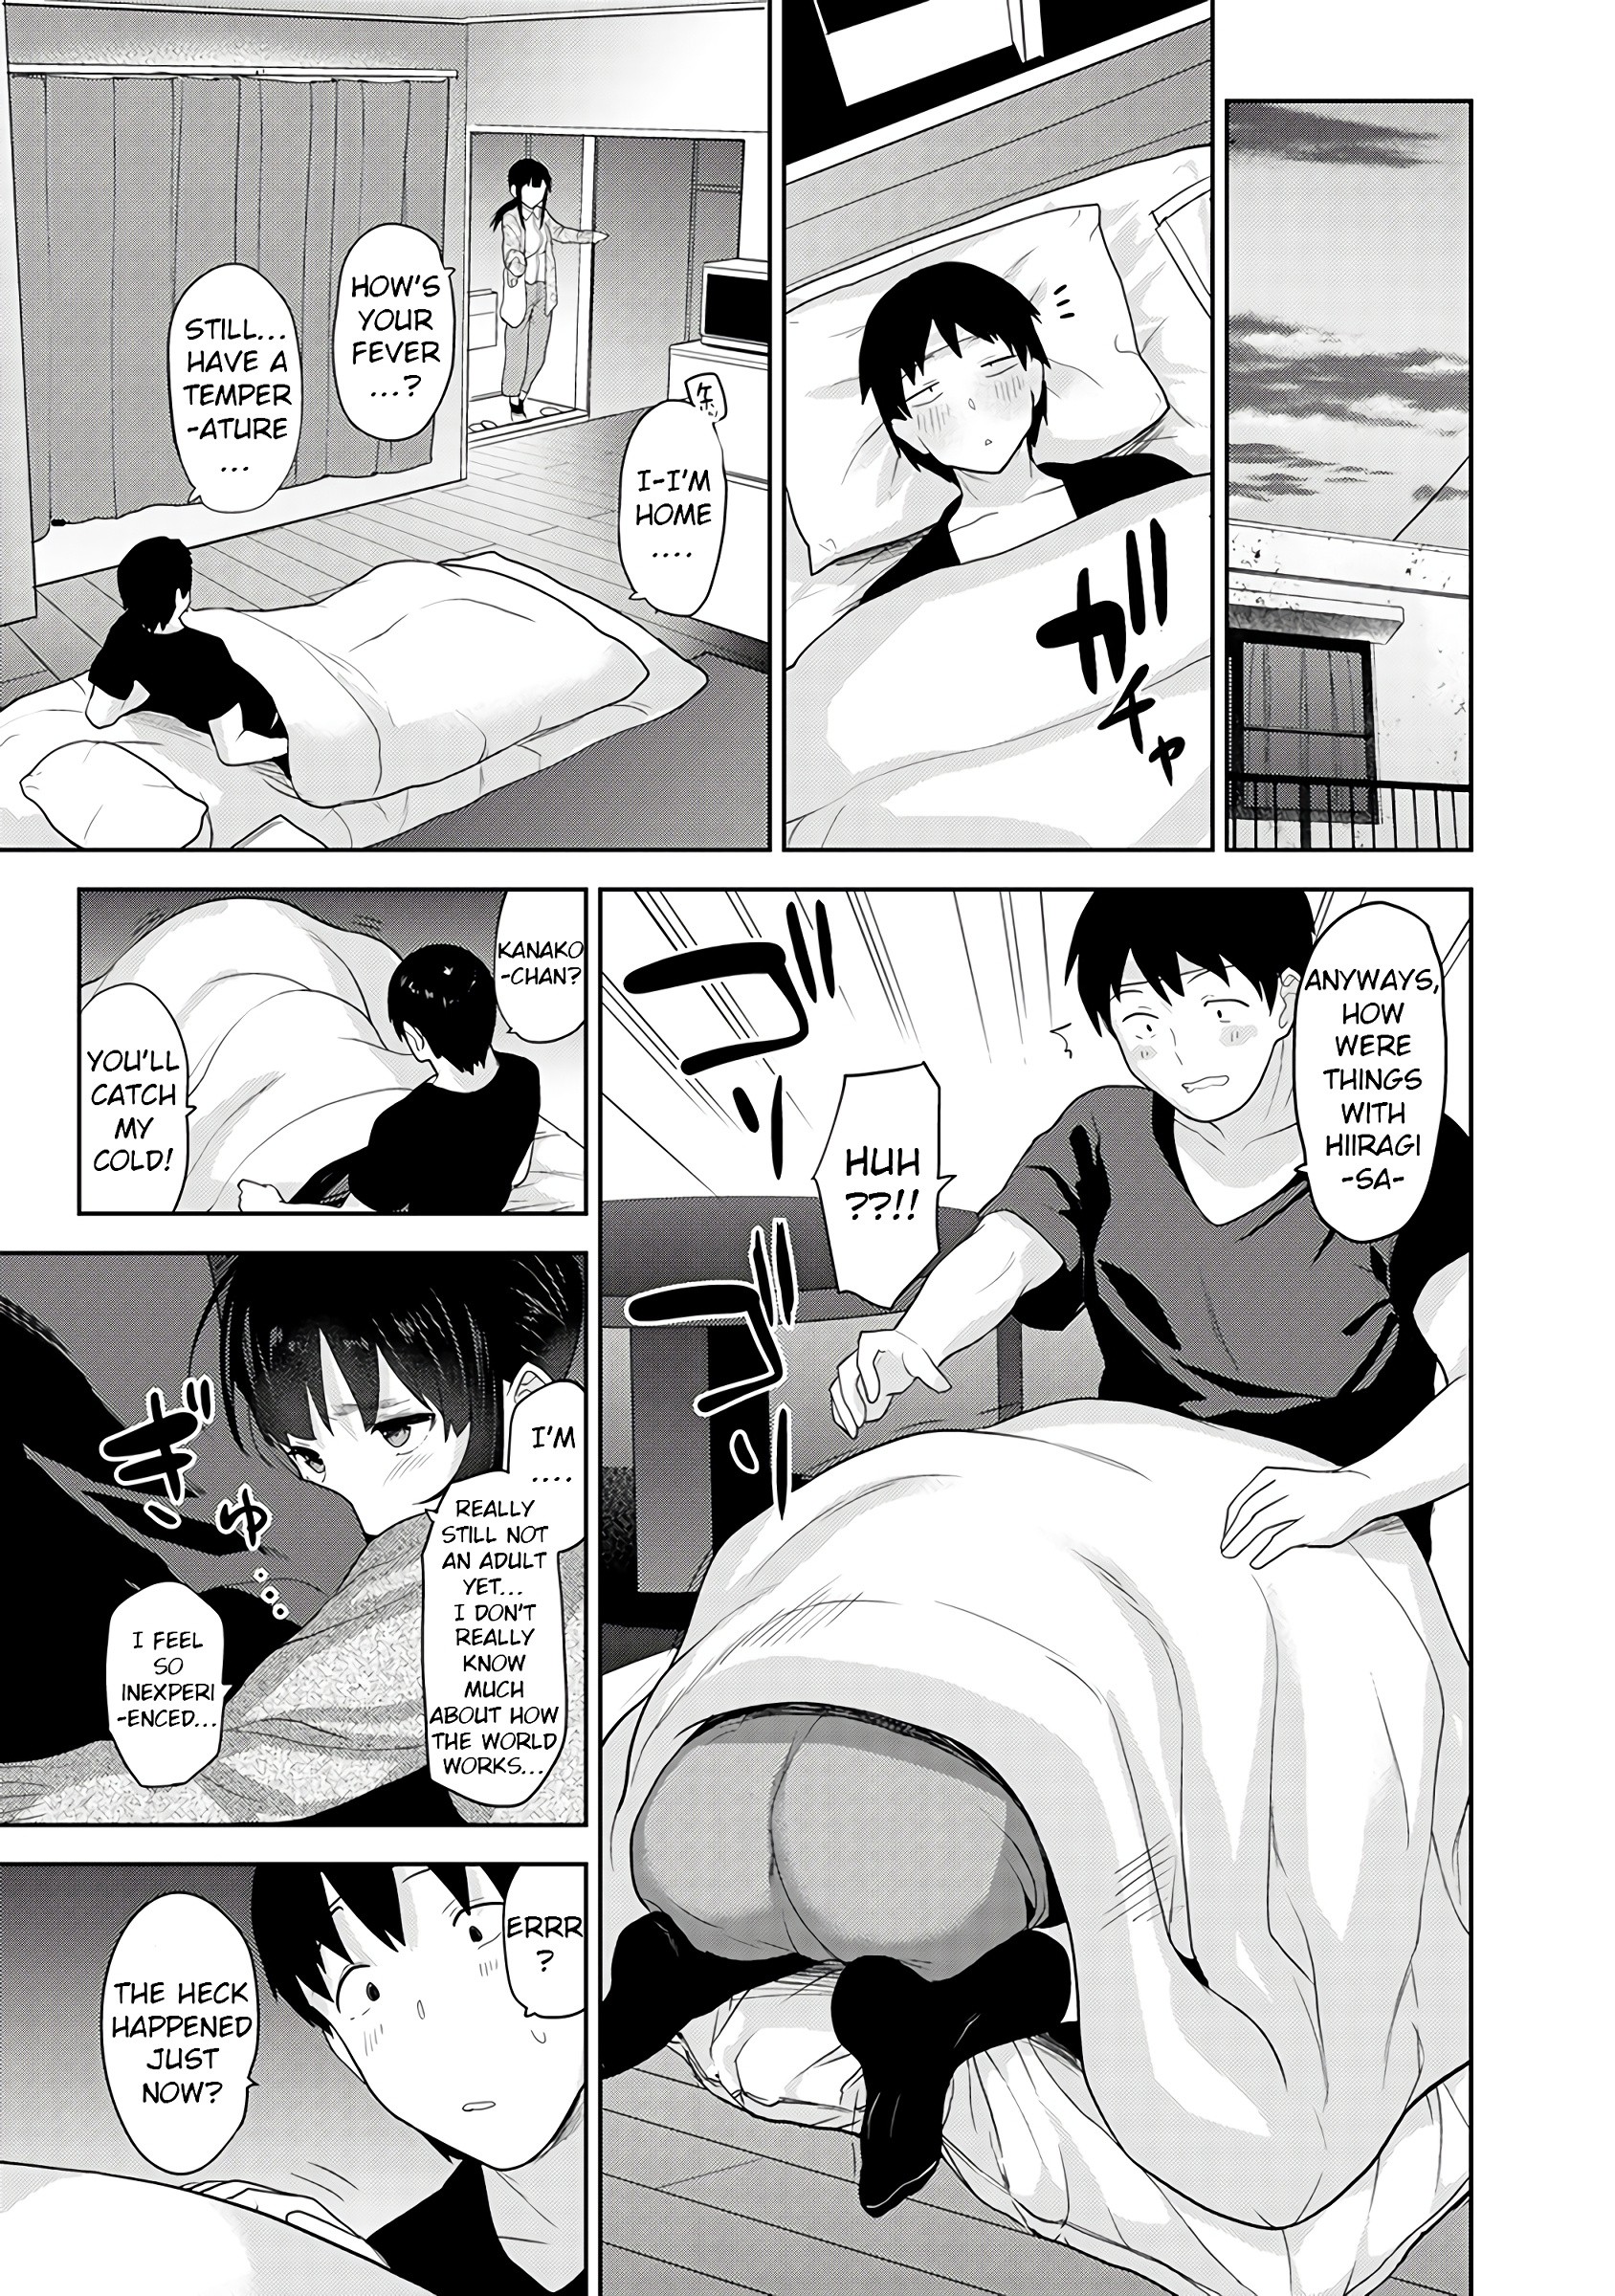 Method to Catch a Pretty Girl 9 hentai manga picture 17